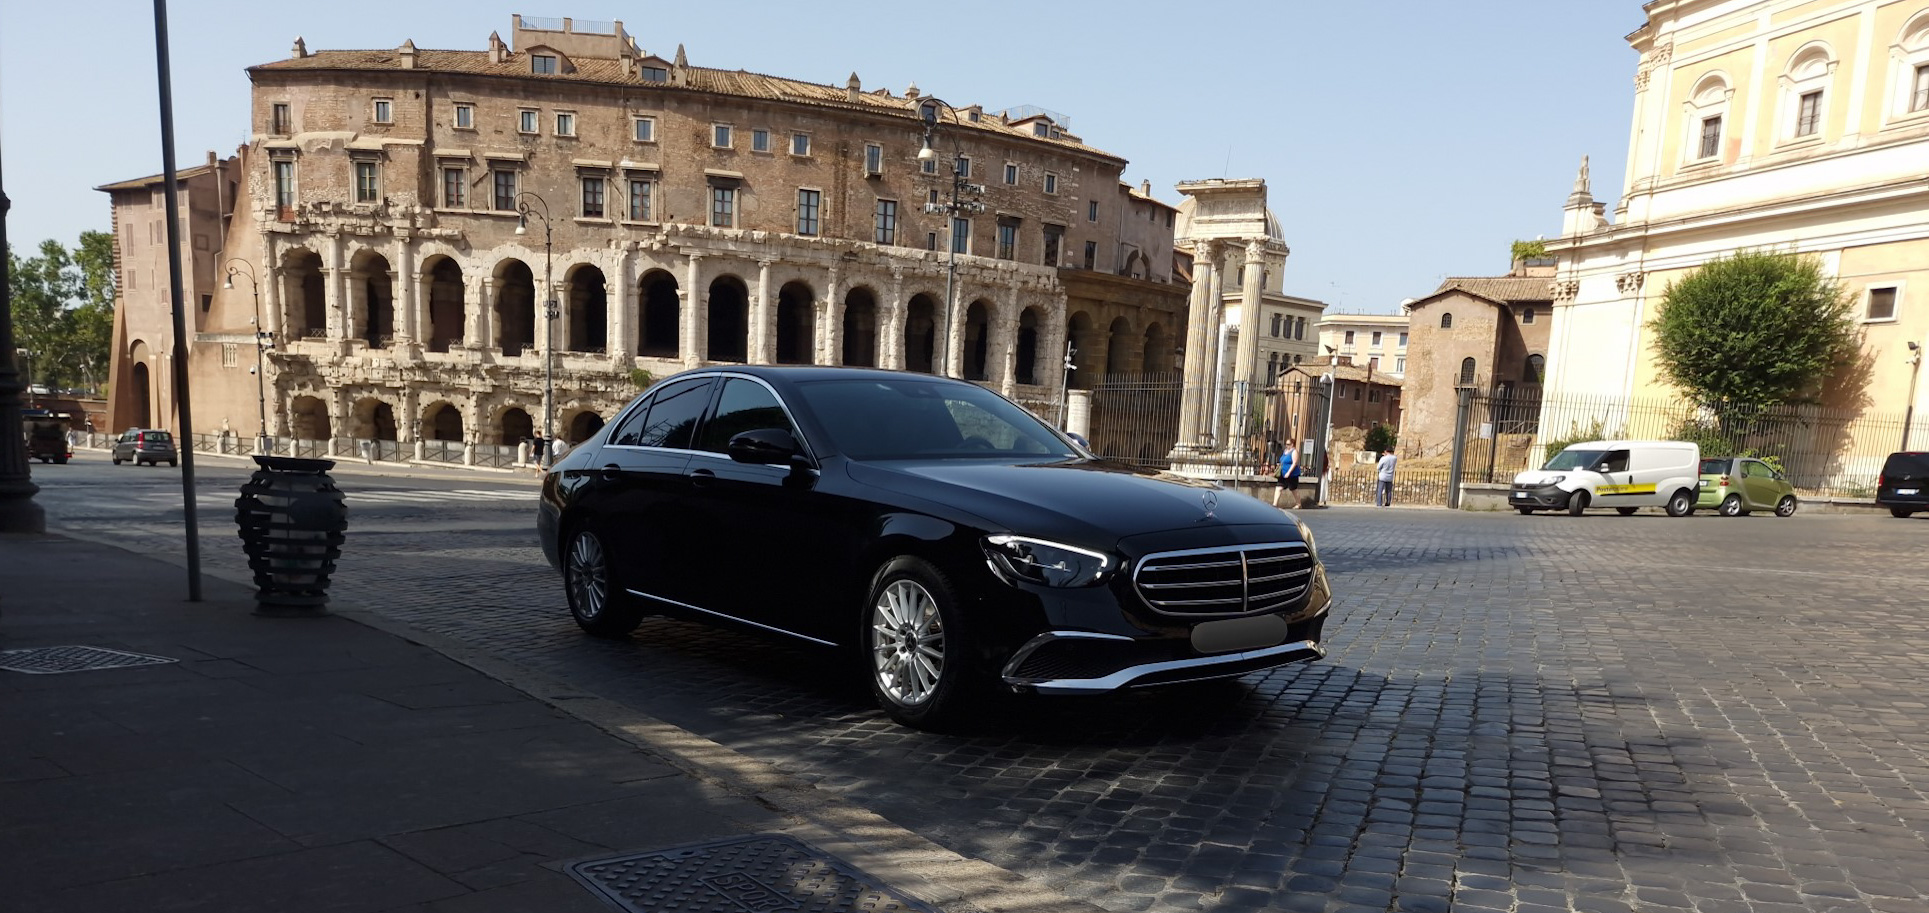 mercedes e class, Sedan waiting in front of the Marcello Teatro, Rome